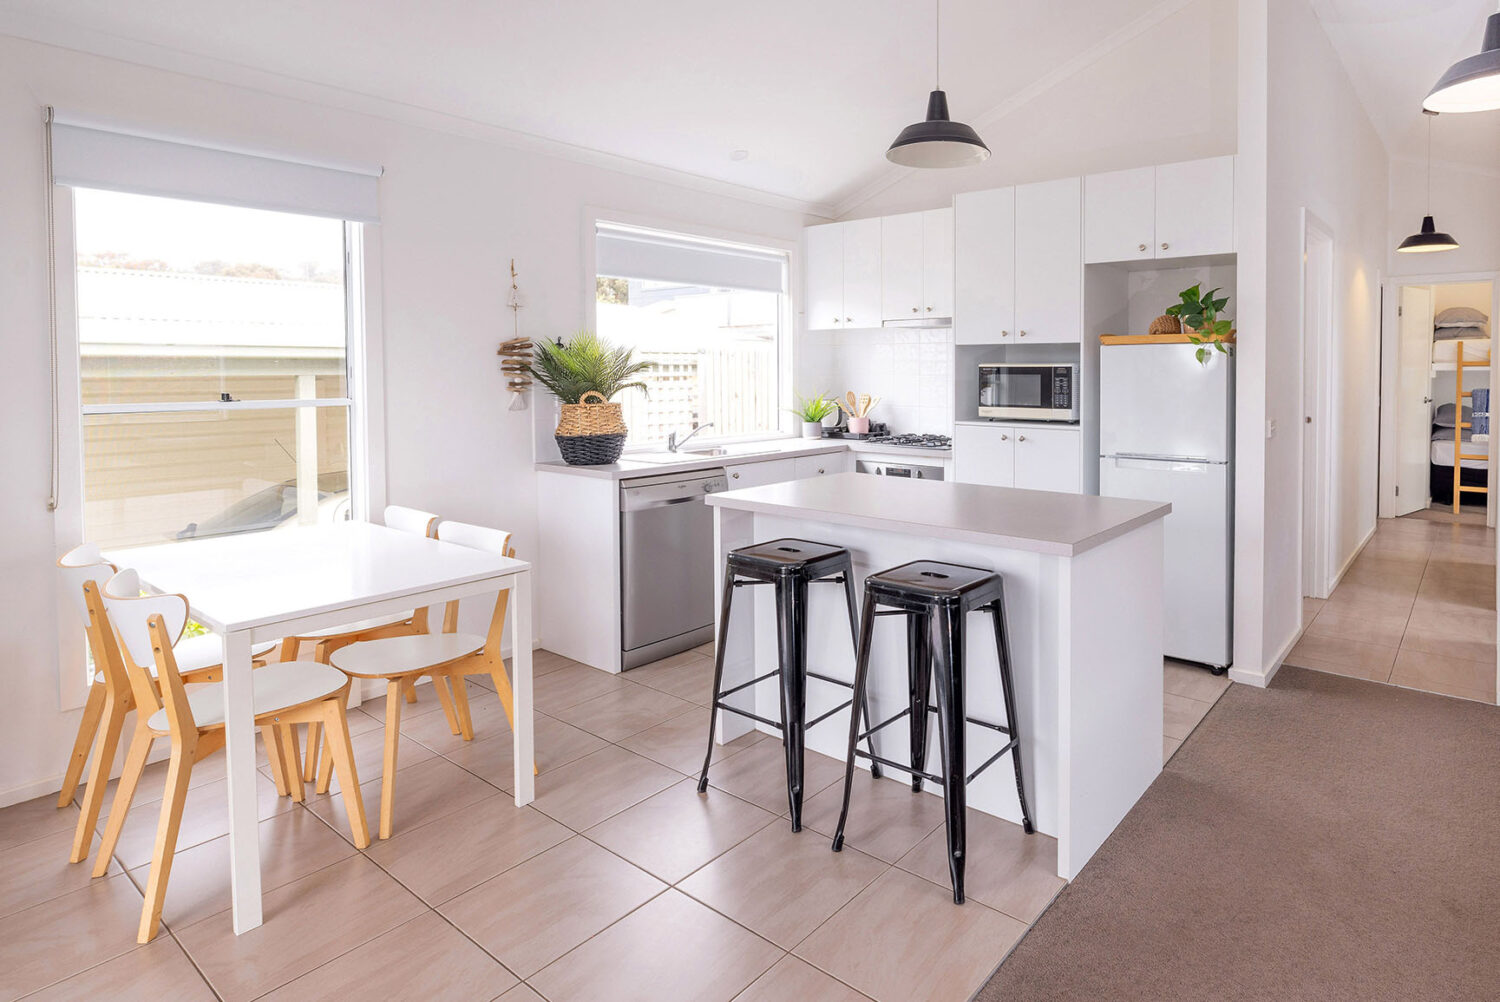 BIG4 Bellarine - Kitchen and Dining Area in the 3 Bedroom Cabin